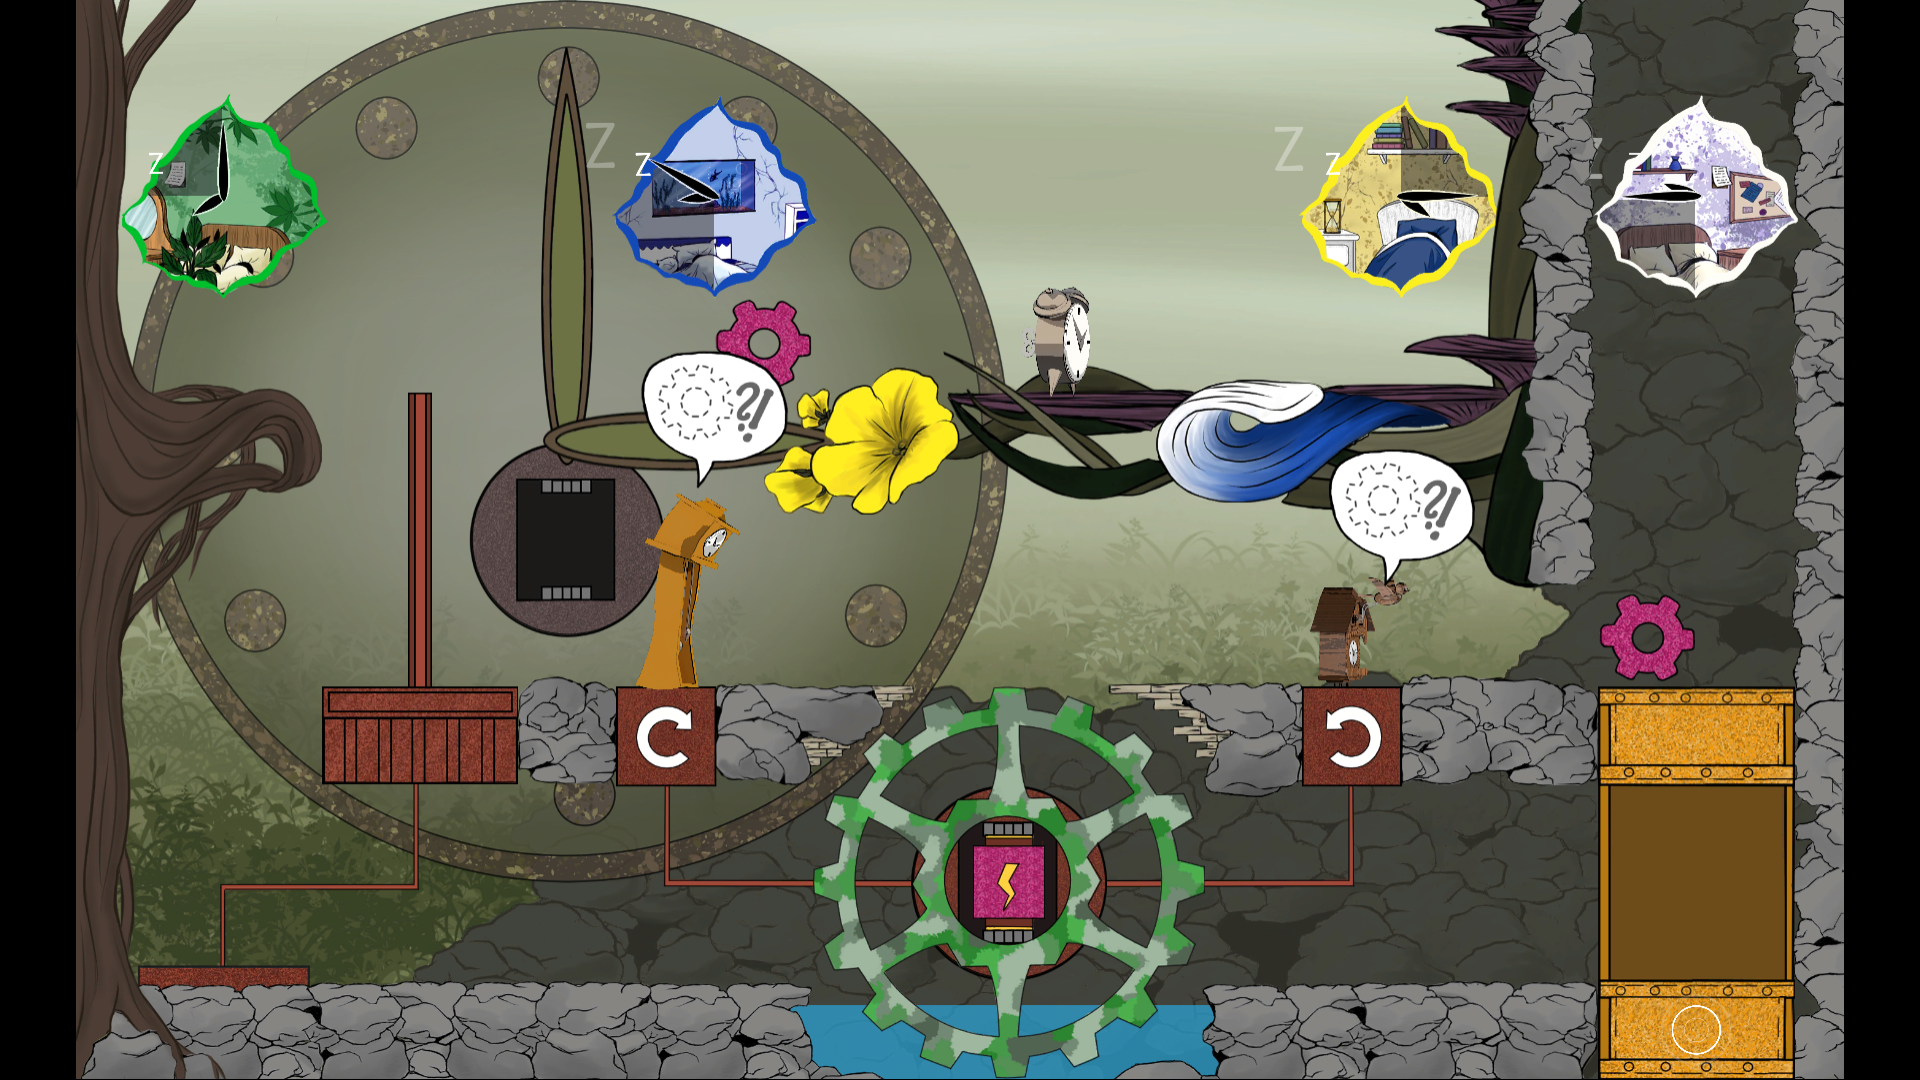 Screenshot of the game WAKE. It shows a level with a dark forest setting from a 2D side-scrolling perspective. The camera is zoomed out and shows the whole level. It consists of three different clocks (while the grandfather clock and the cuckoo clock are broken), four windows (in the colors of green, blue, yellow and white), a gear in the bottom center that is connected to two ground plates that control the direction of its rotation, a giant clock-face in the background with watch hands that can be walked on and many more items and elements that need to be considered to complete the level.